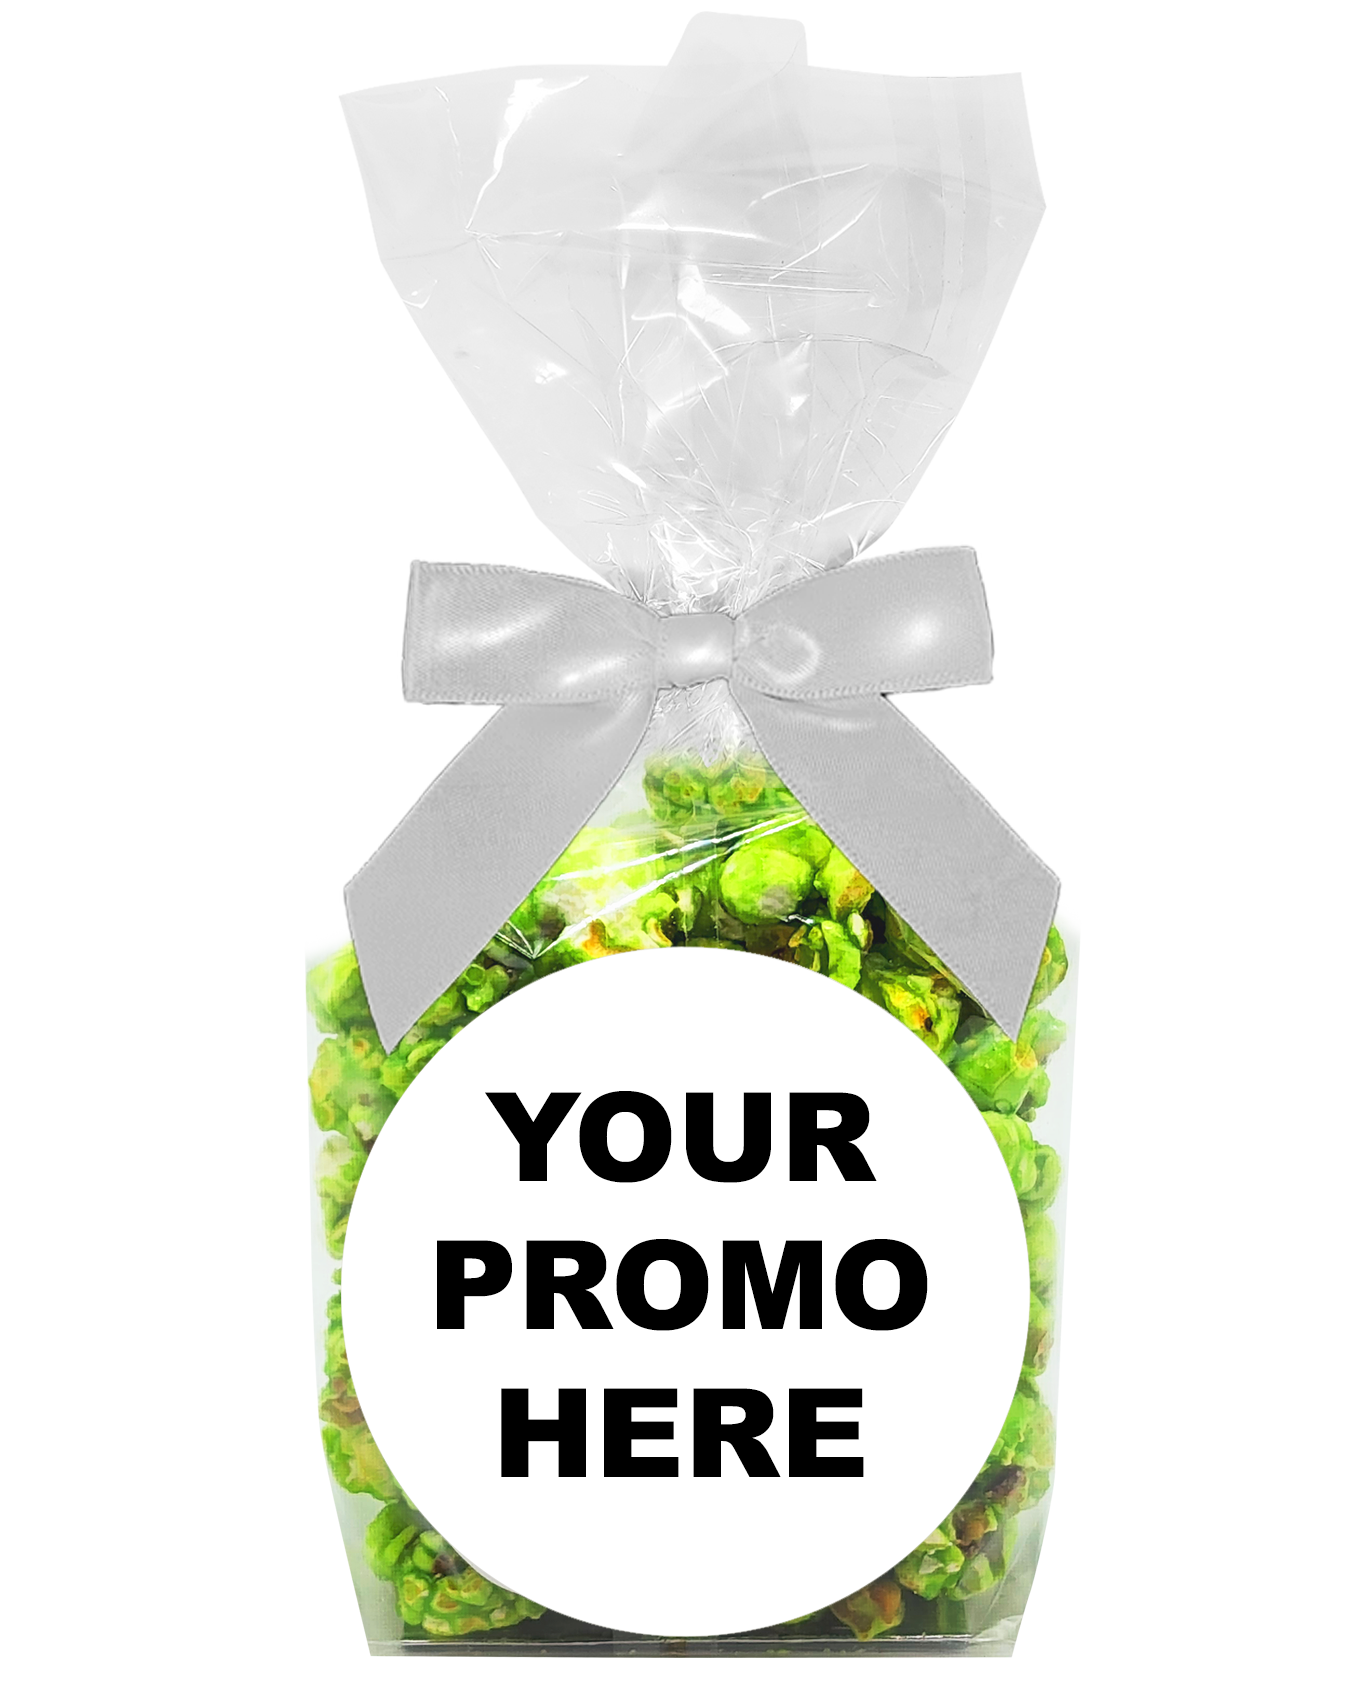 Pucker Pop!™ - Green Apple Bags & Bows (as low as $4.99 per bag) Case of 12 Price